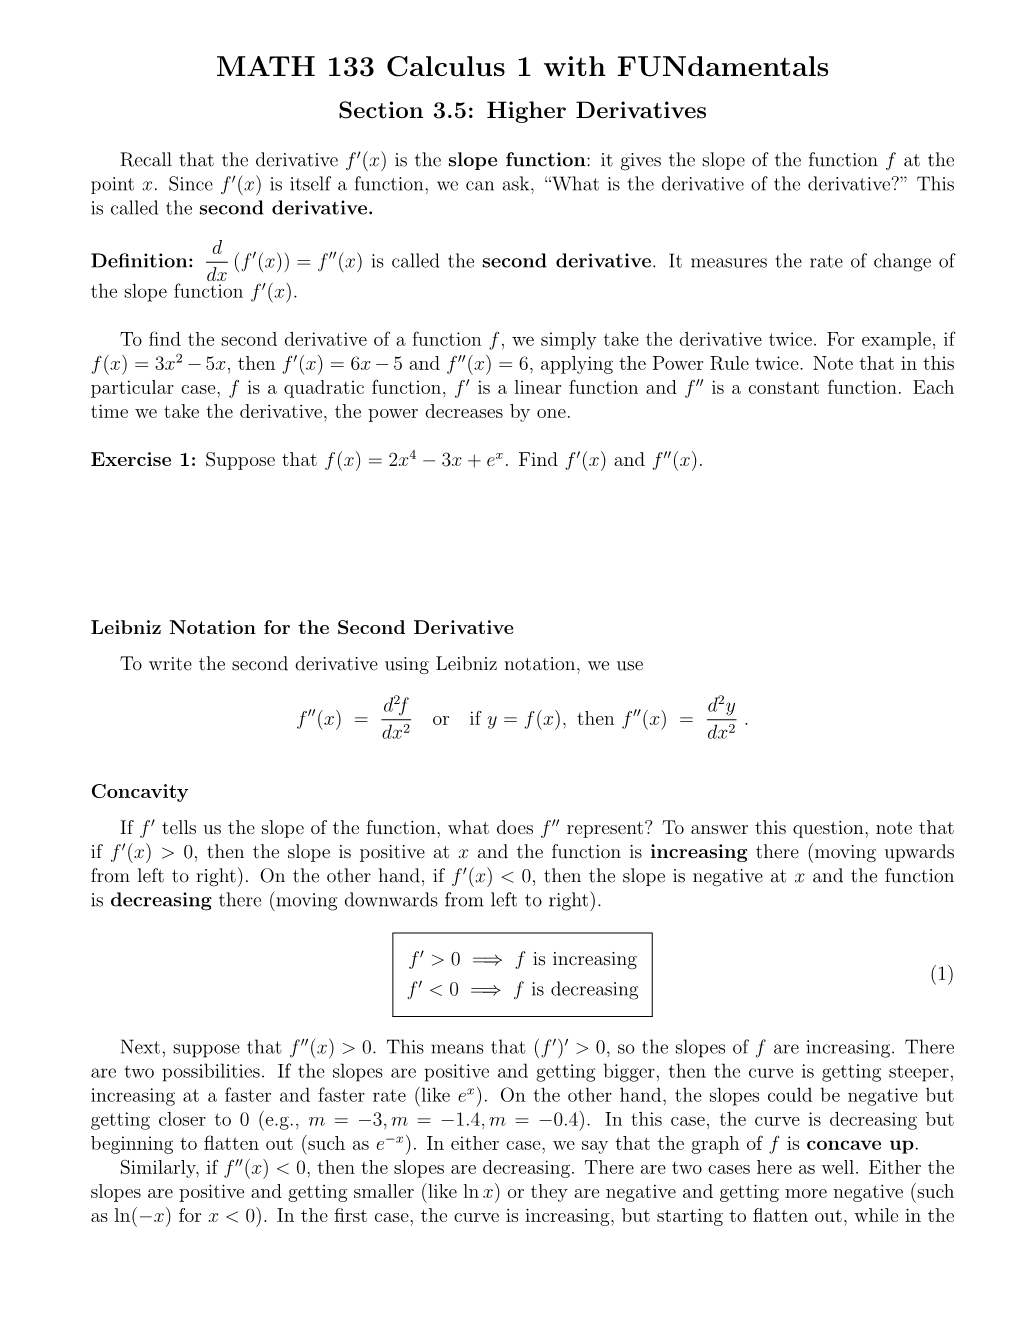 MATH 133 Calculus 1 with Fundamentals Section 3.5: Higher Derivatives